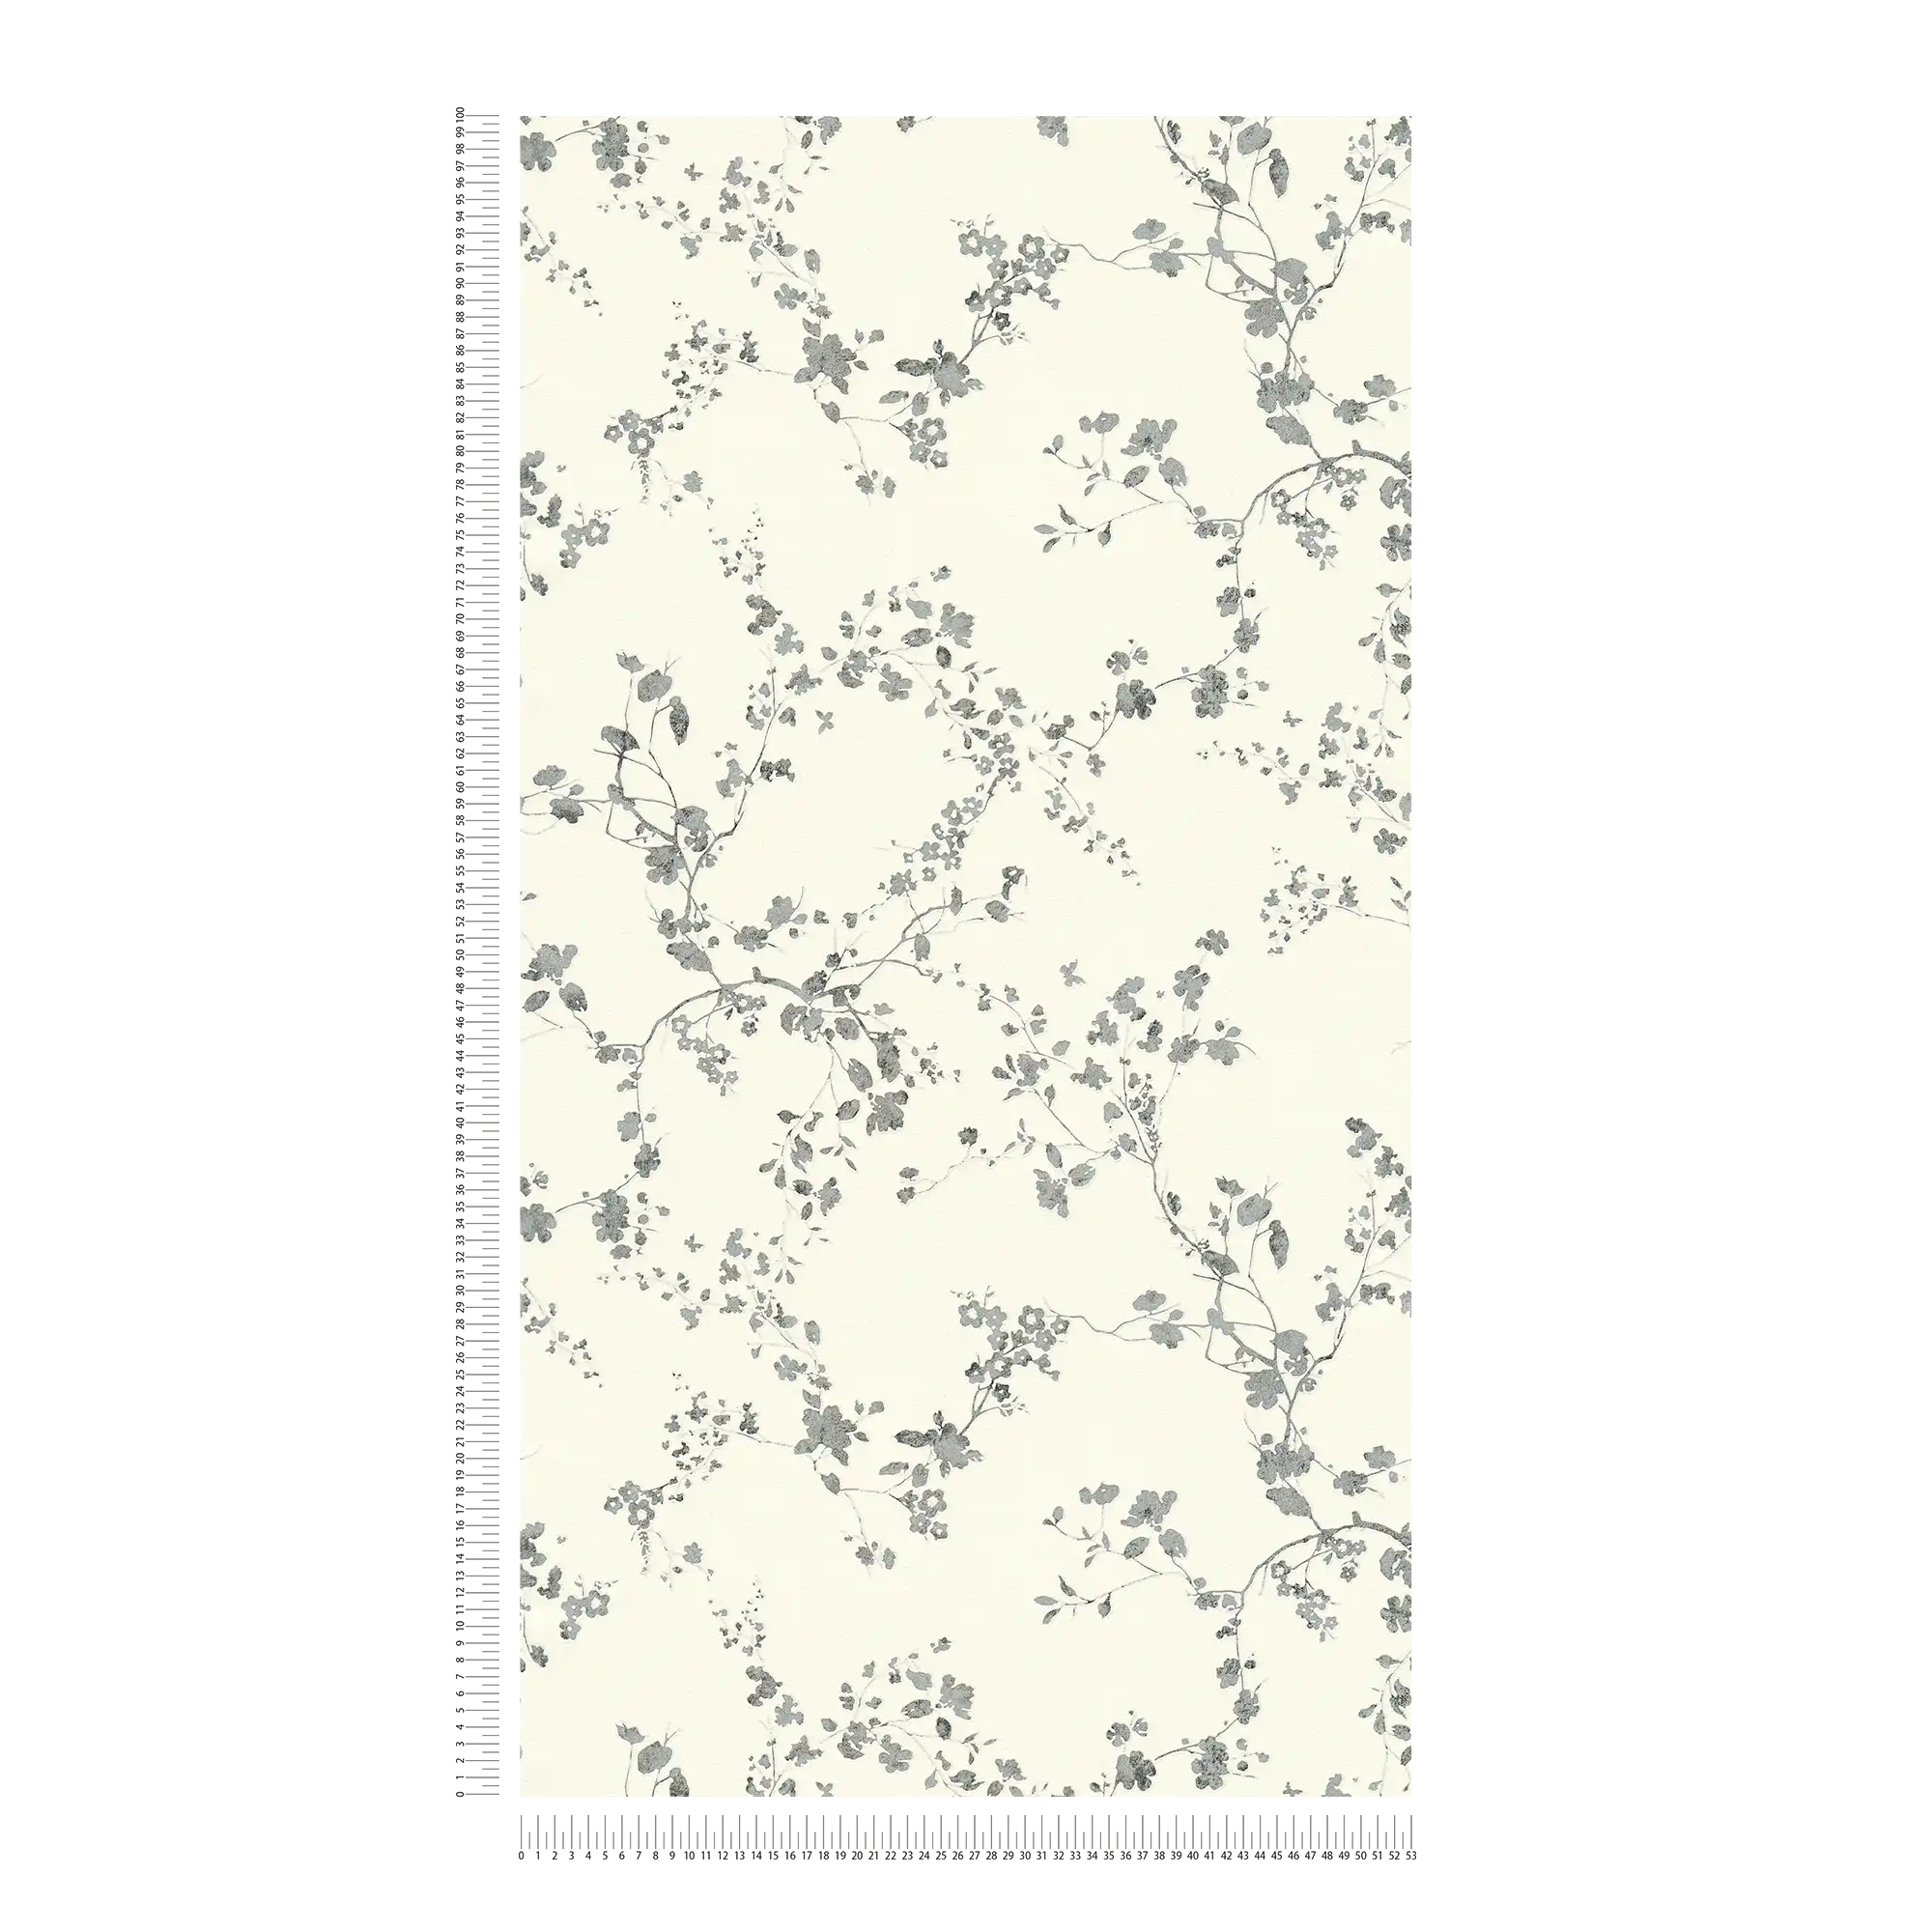             Non-woven wallpaper with flowers in country style - silver, black, white
        